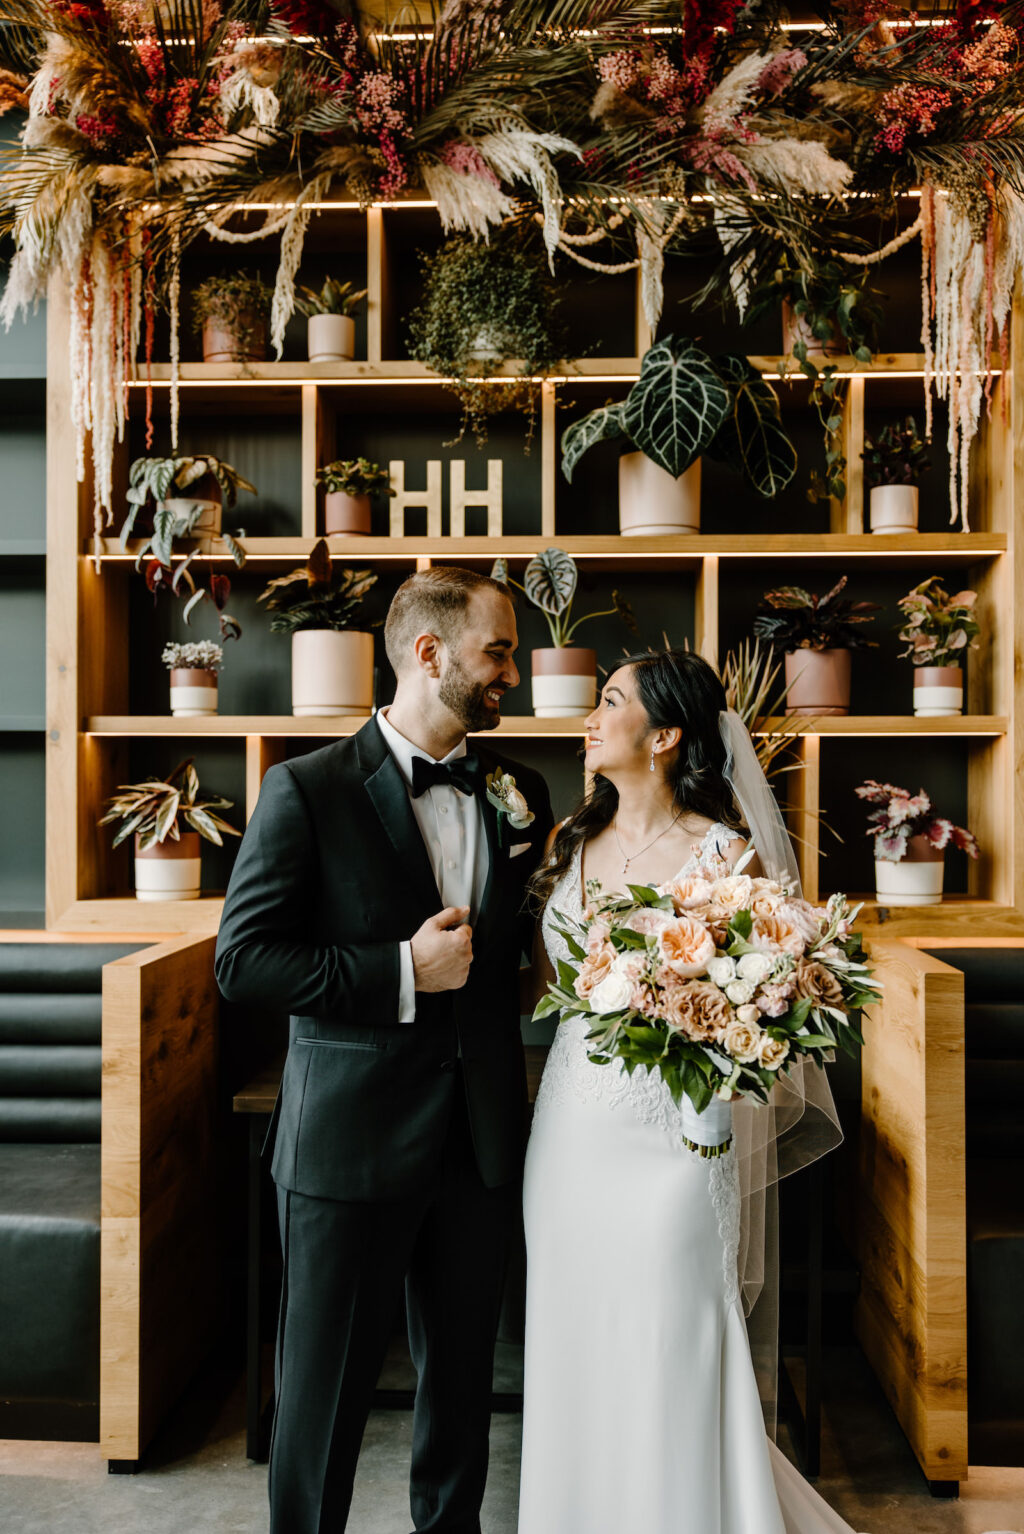 Modern Boho Bride and Groom Wedding Portrait with Neutral Floral Bouquet | Tampa Bay Wedding Florist Iza's Flowers | Unique South Tampa Wedding Venue Hyde House